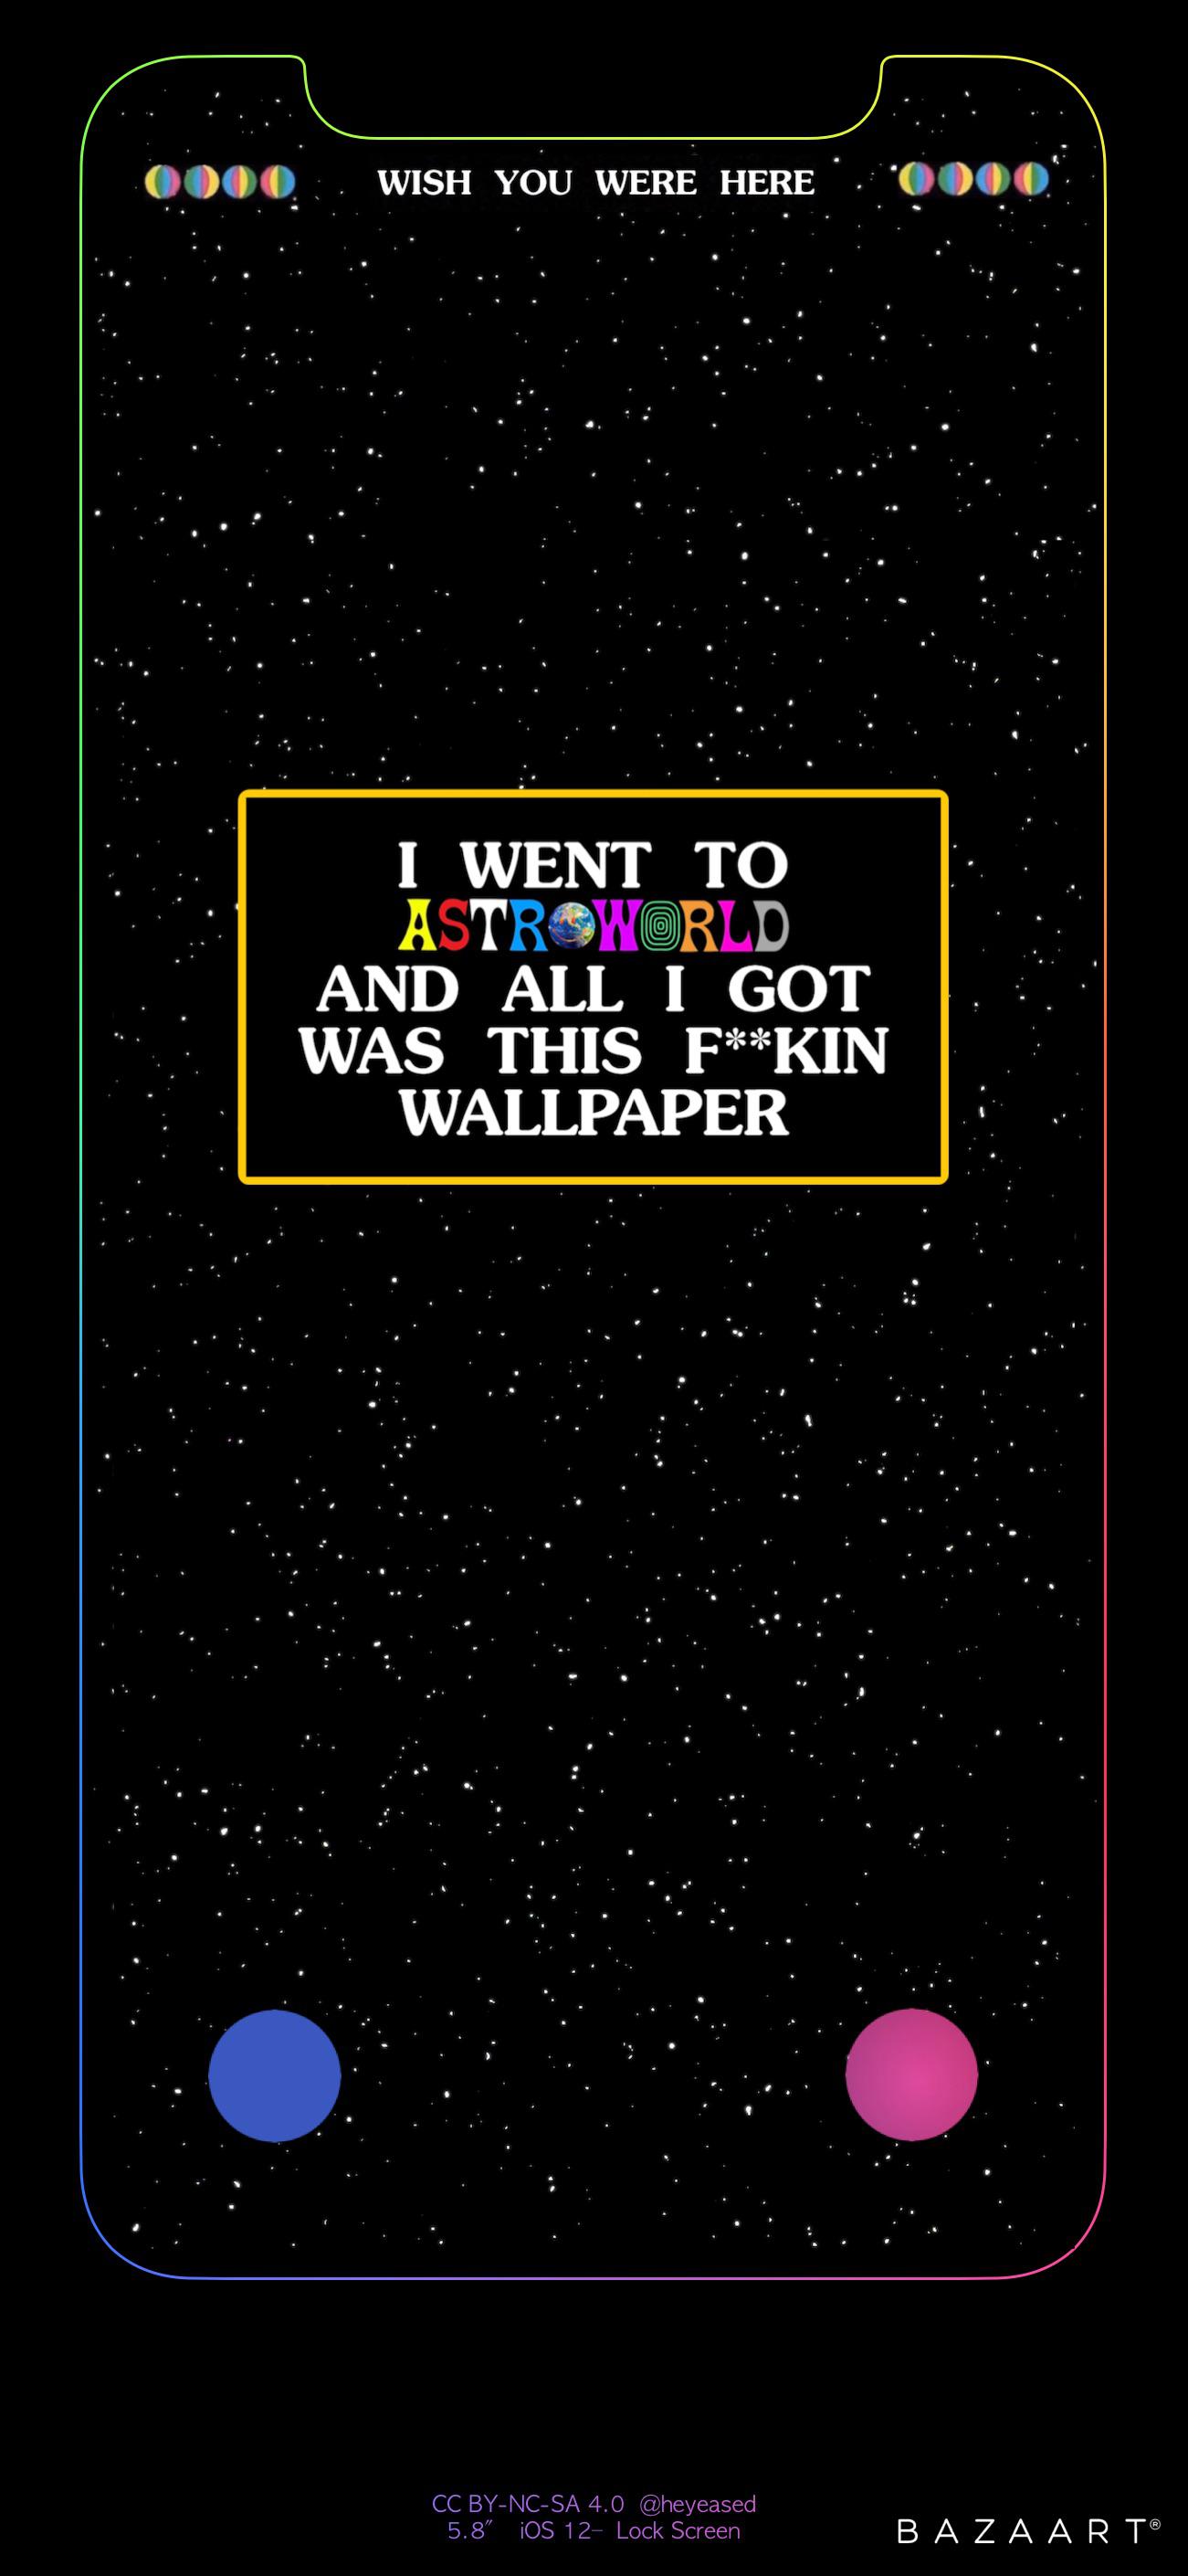 I made my own iPhone X background with inspiration from other